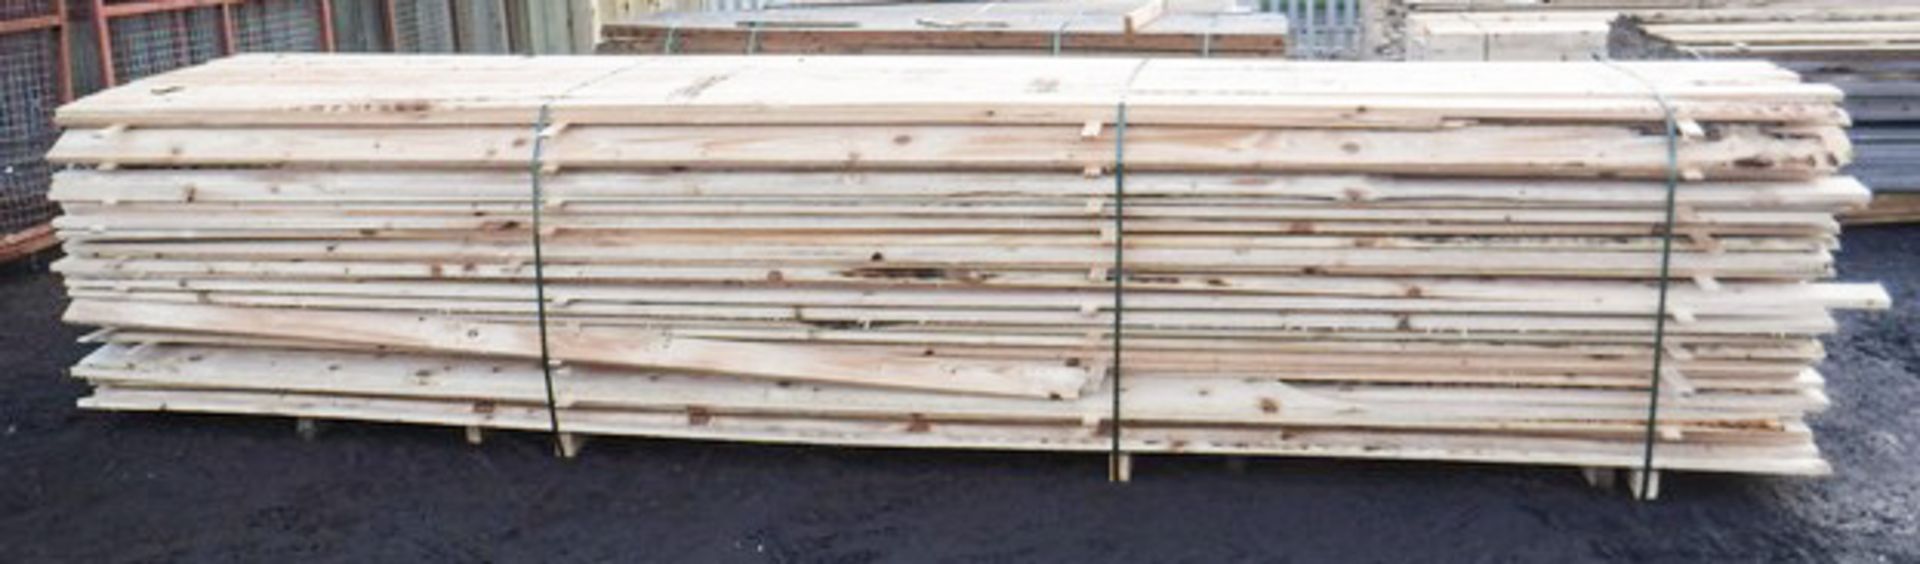 TIMBER PACK SPF - 15 X 18 X 80 APPROX - Image 3 of 3